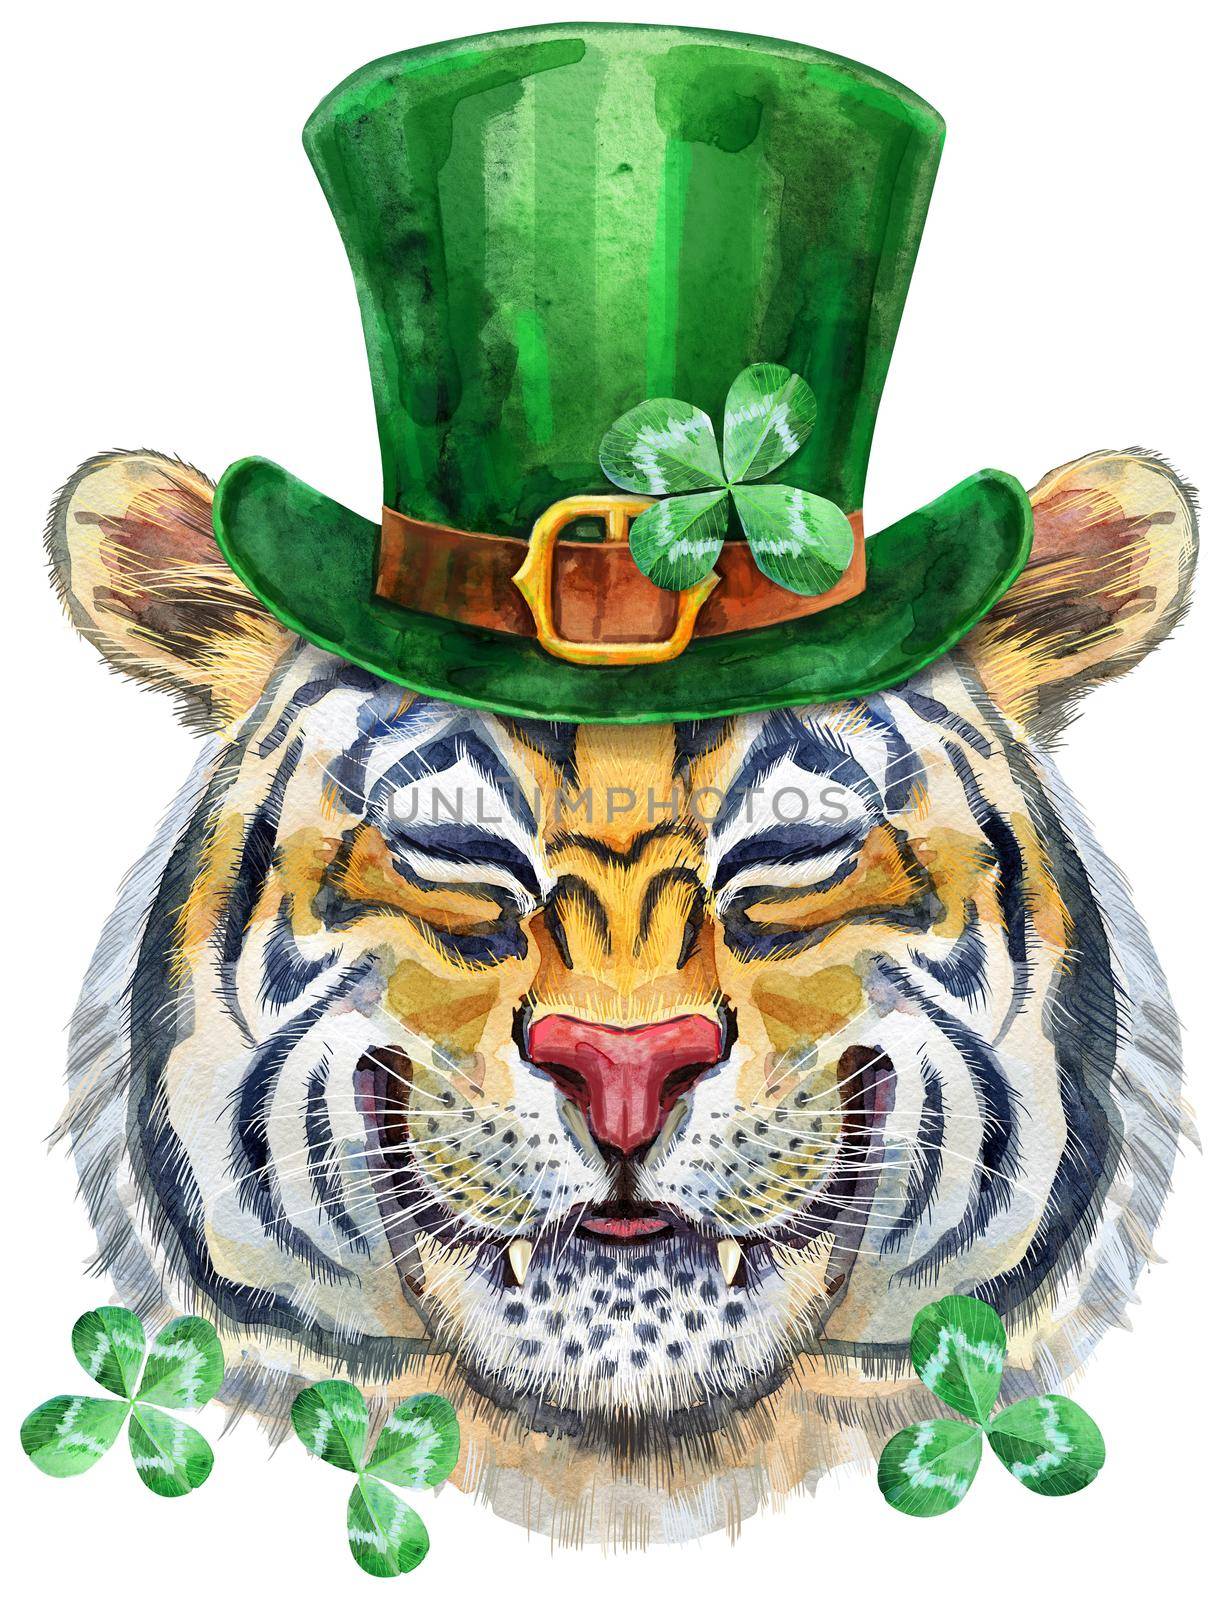 Colorful orange smiling tiger wearing a green leprechaun hat. Wild animal watercolor illustration on white background by NataOmsk